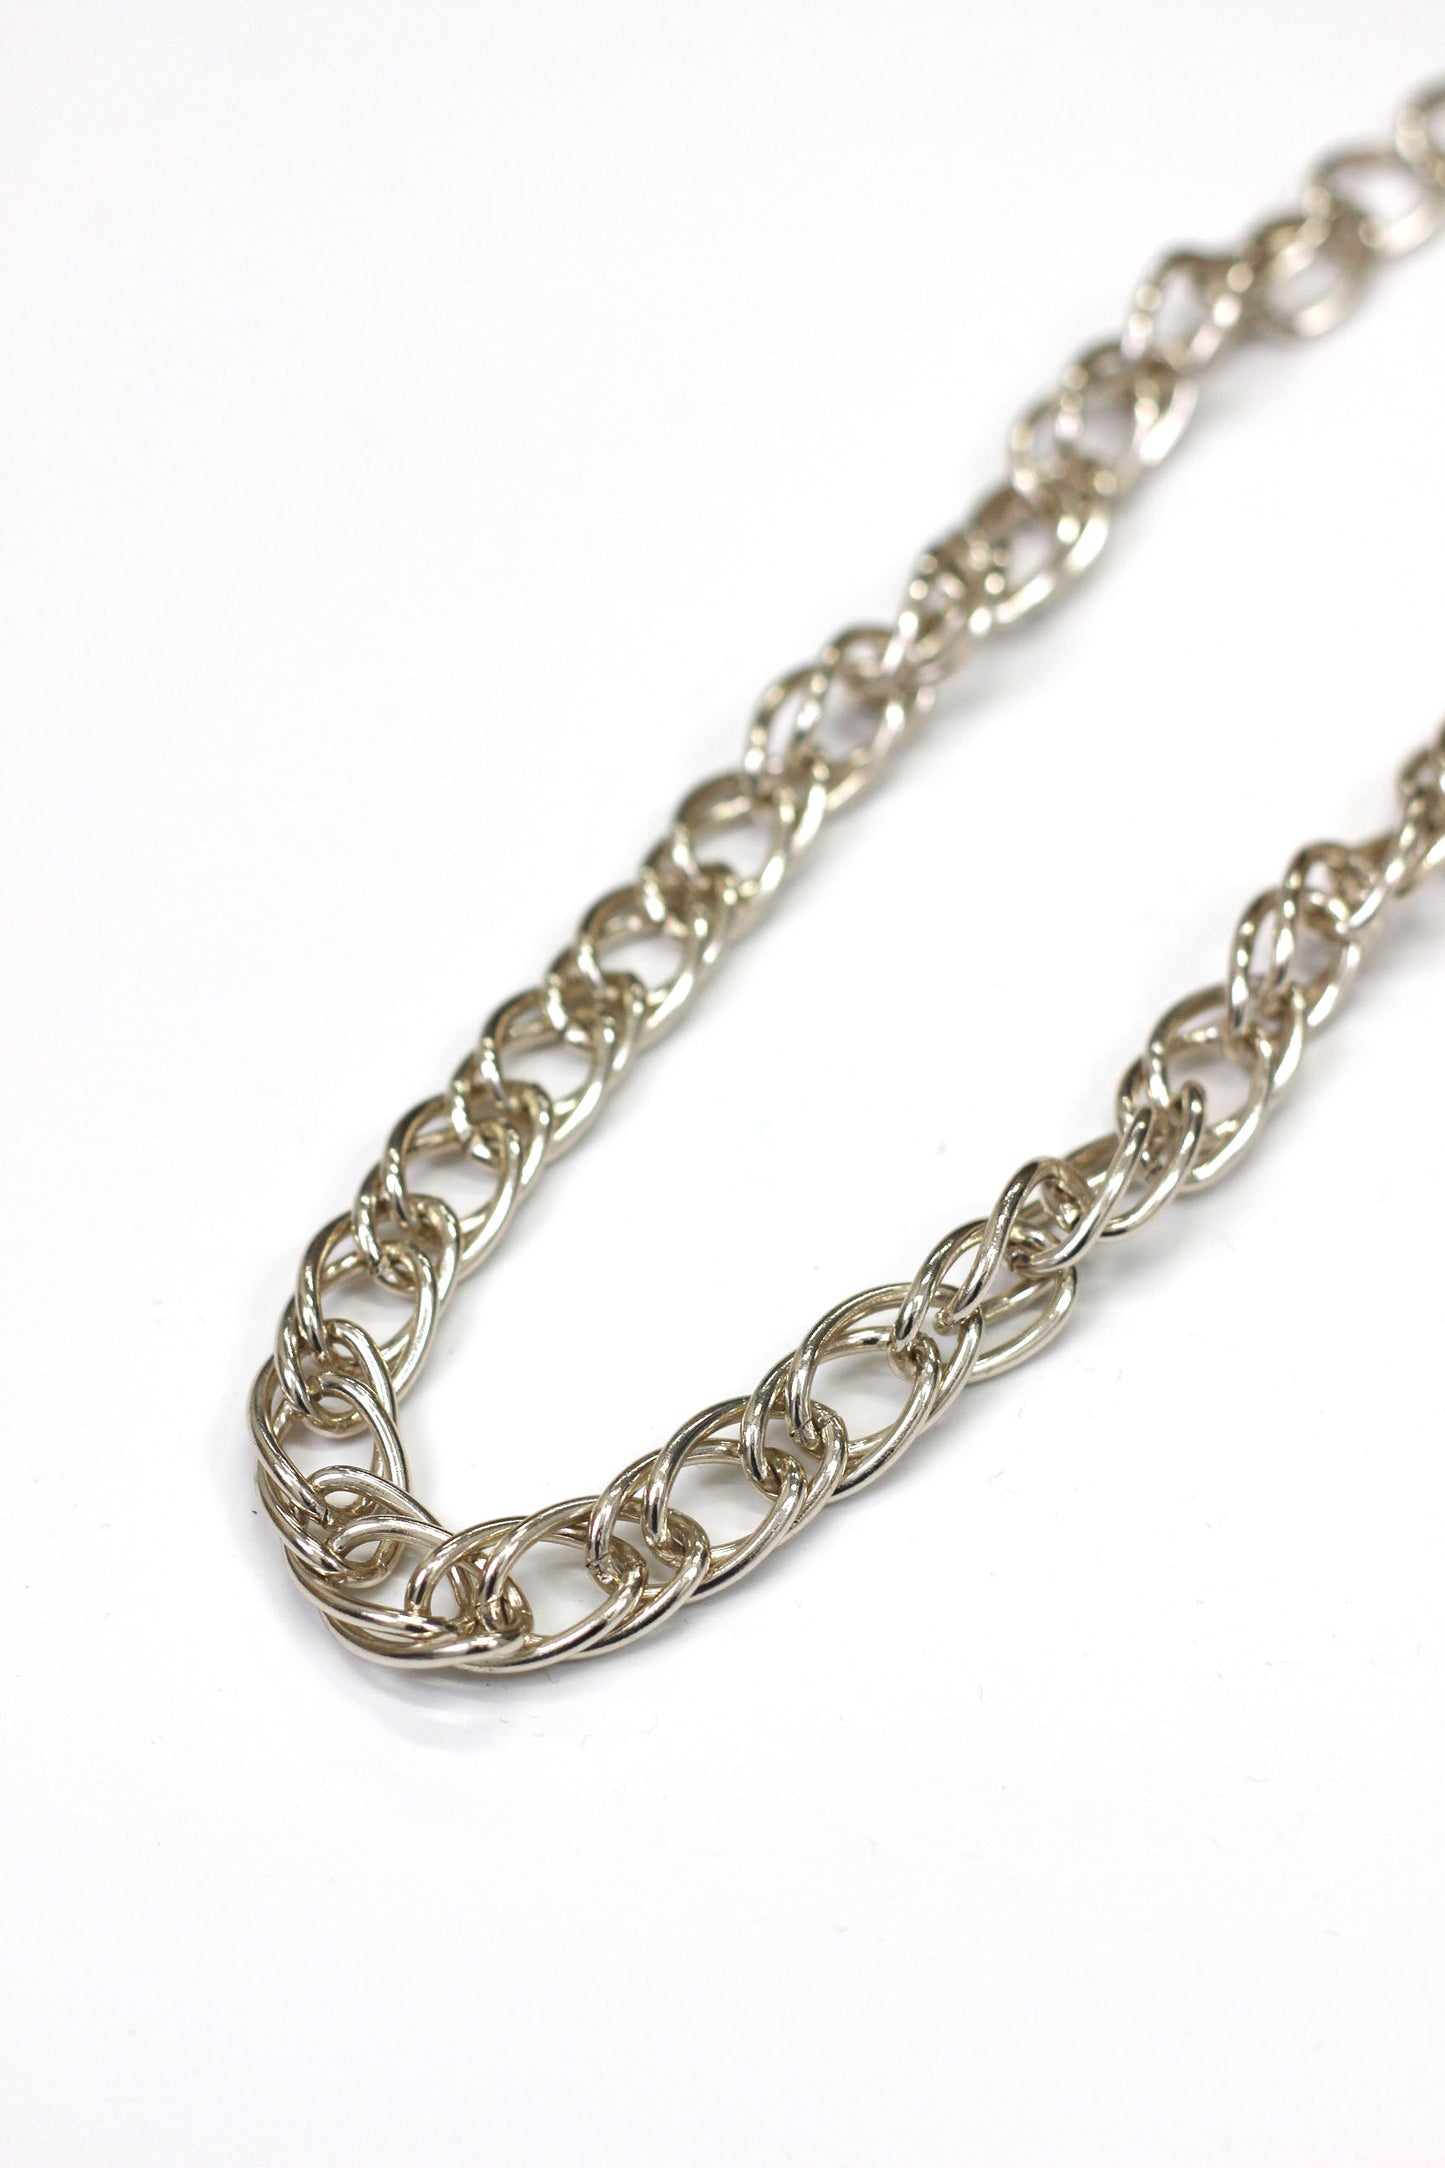 Vintage silver chain necklace 気高い輝き